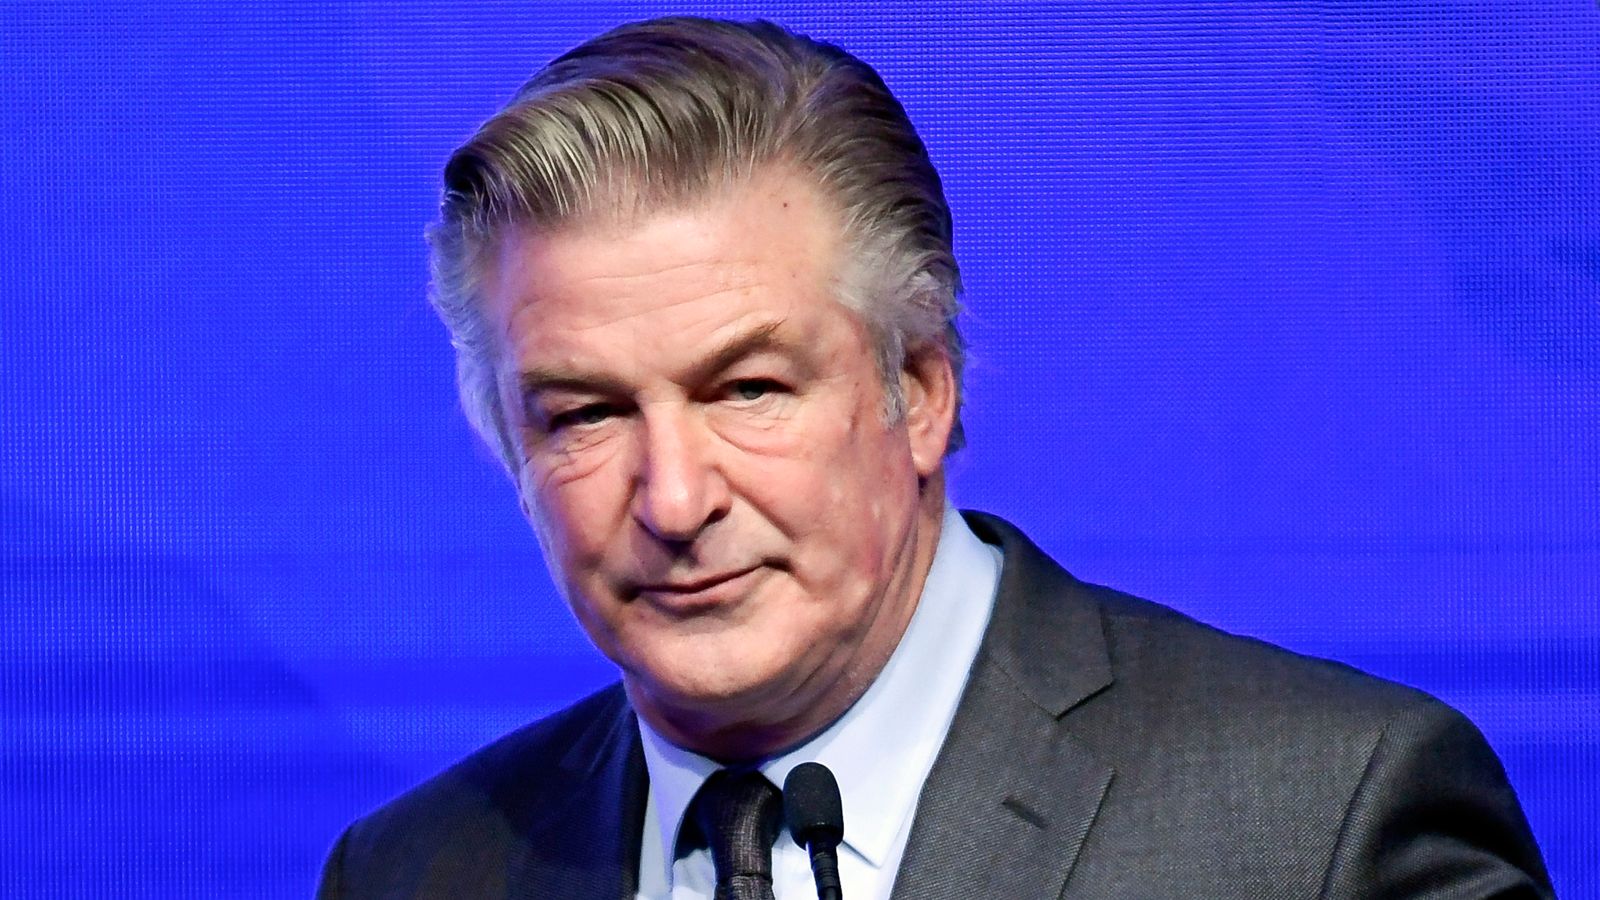 Alex Baldwin and family to star in reality TV series next year